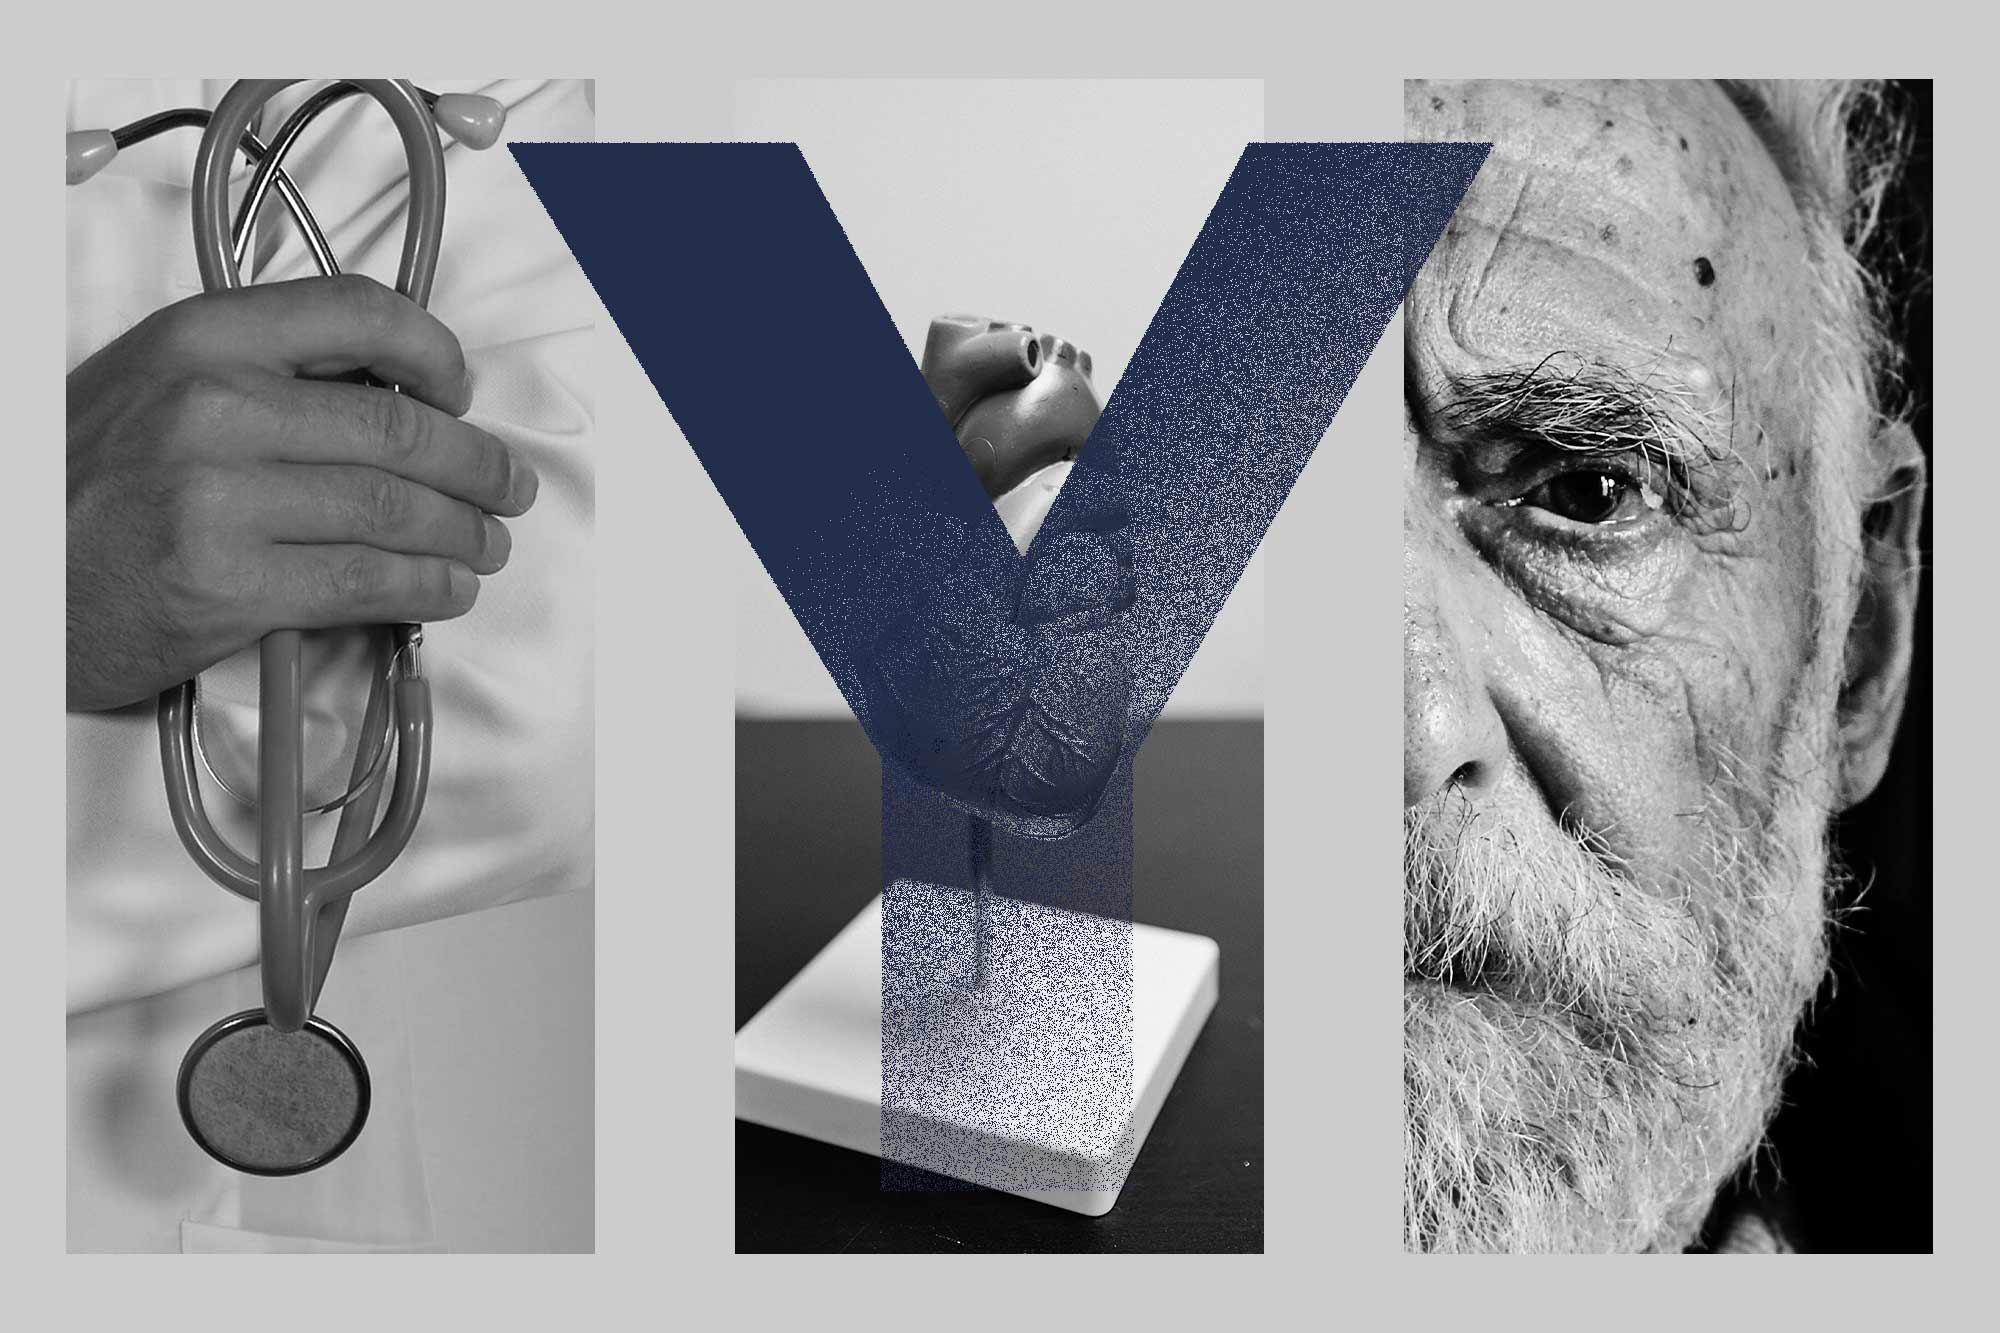 A dissolving letter "Y" in front of three images of a stethoscope, a heart model, and a man's face.